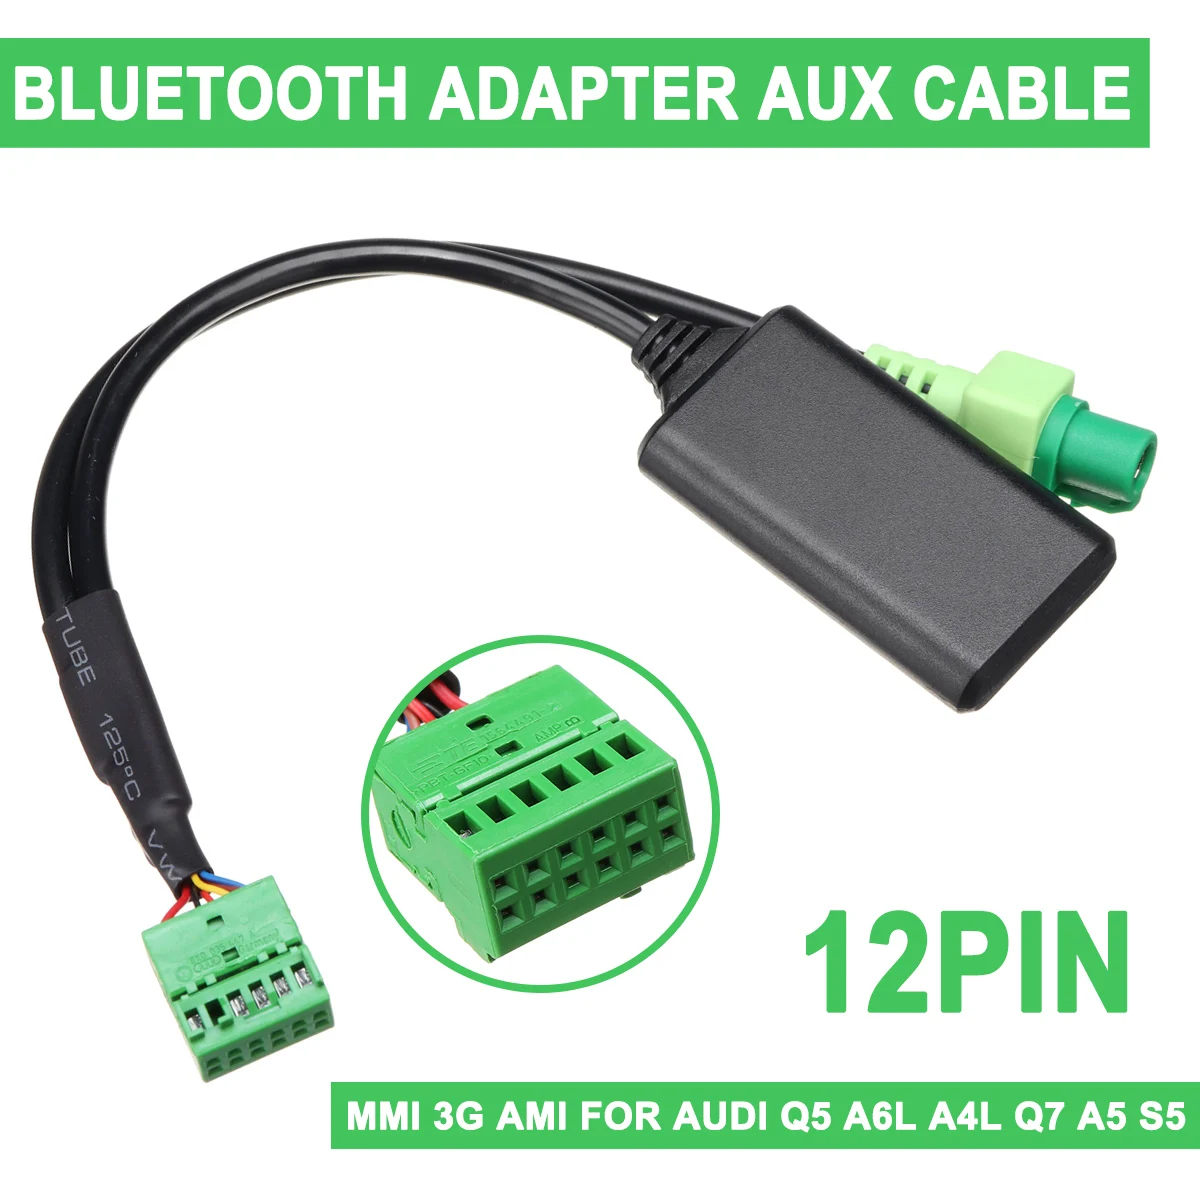 Car MMI 3G AMI For Audi Q5 A6L A4L Q7 A5 S5 Wireless bluetooth AUX Audio Adapter Cable MMI Socket Interface Audio Input